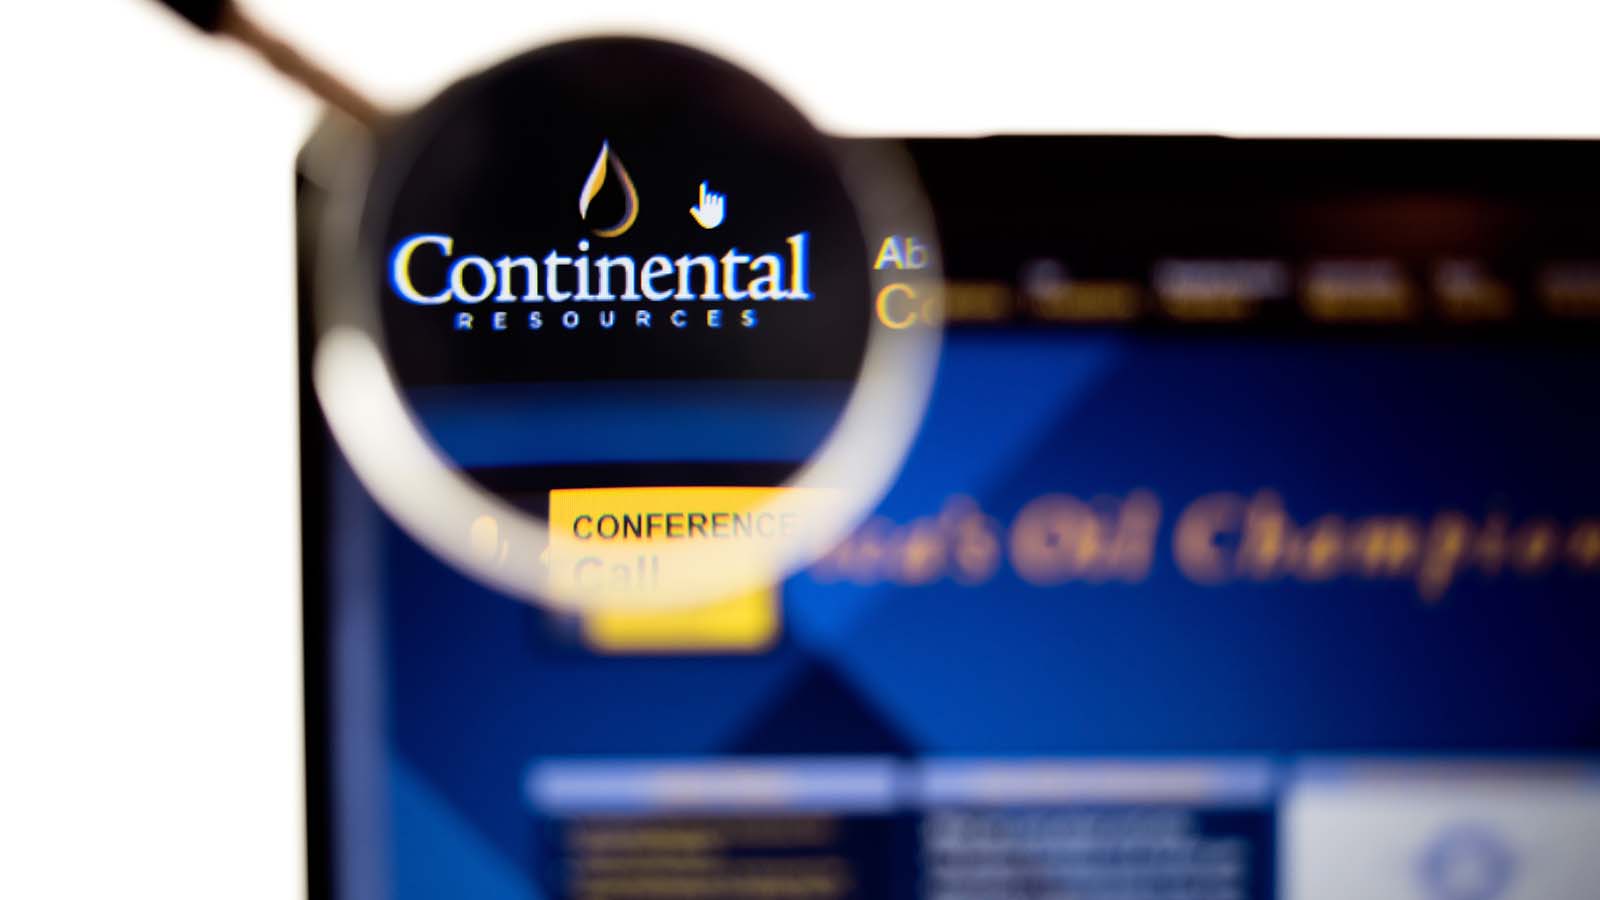 Continental Resources Inc logo visible on display screen clr stock